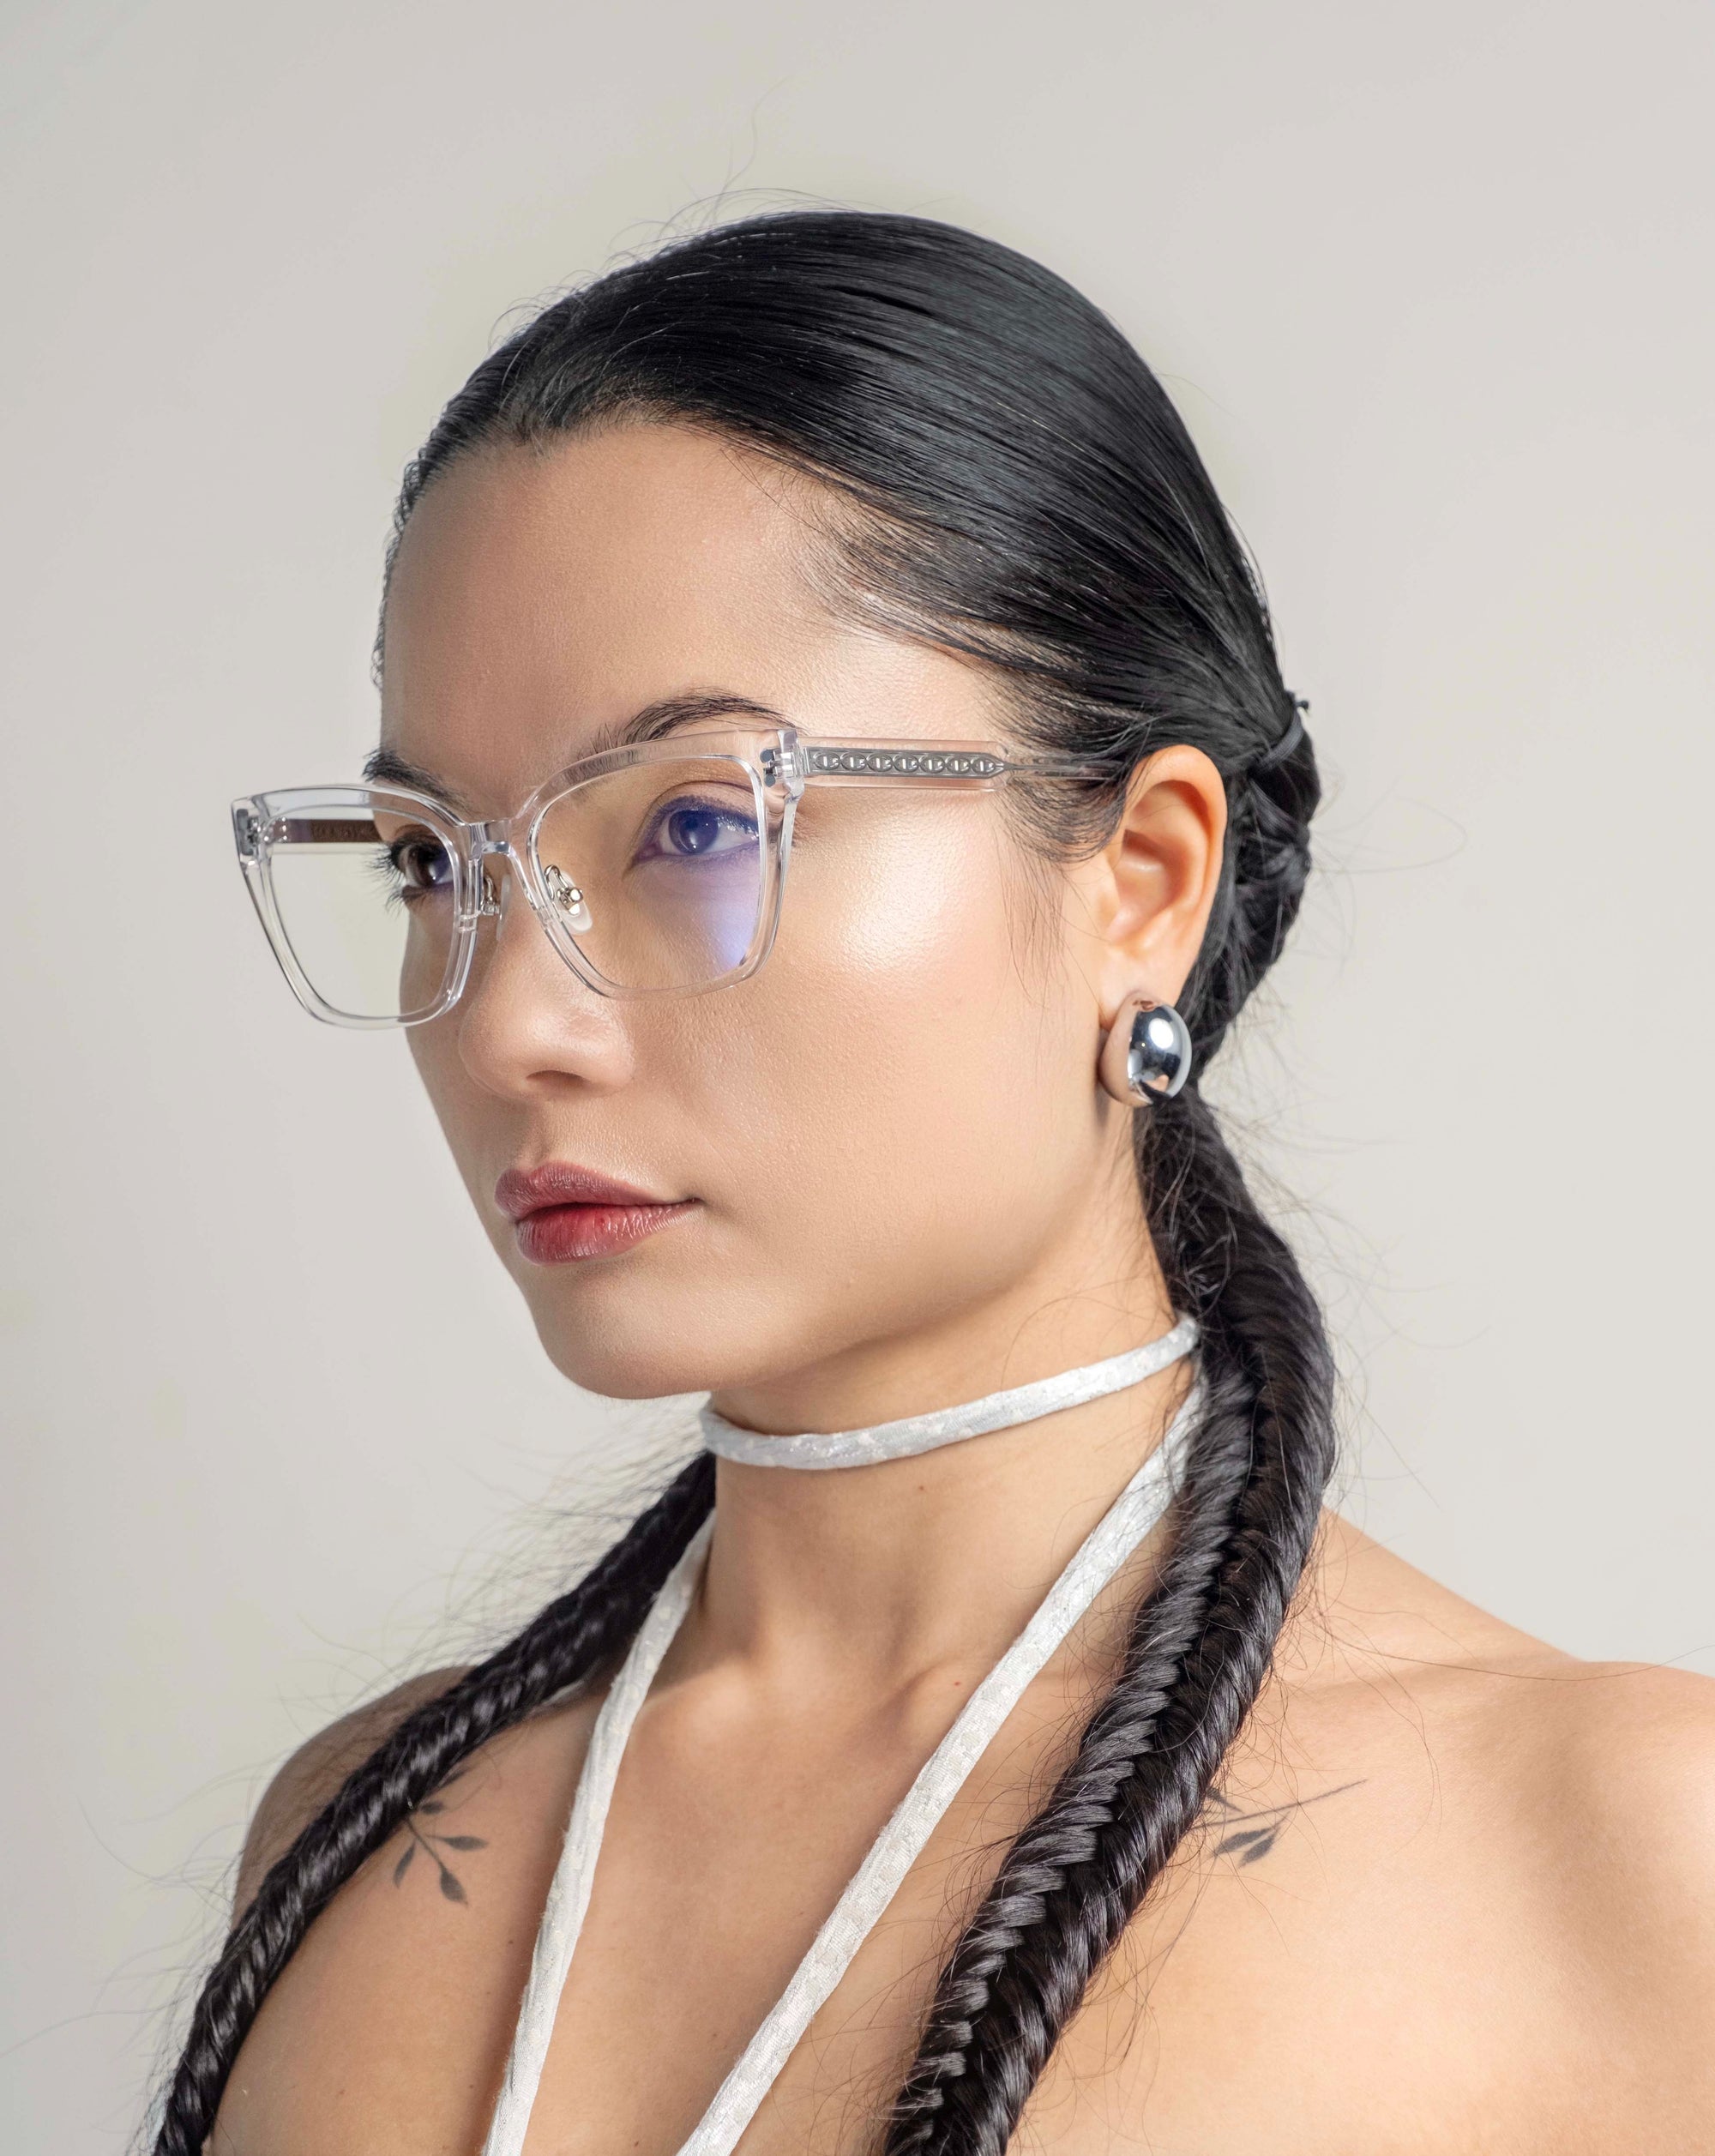 A woman with long, dark hair styled in twin braids and wearing Abbey clear-framed glasses by For Art&#39;s Sake® looks to the side. She has small tattoos on her shoulders, wears large, circular 18-karat gold plated earrings, and a white choker. The background is plain and light-colored.